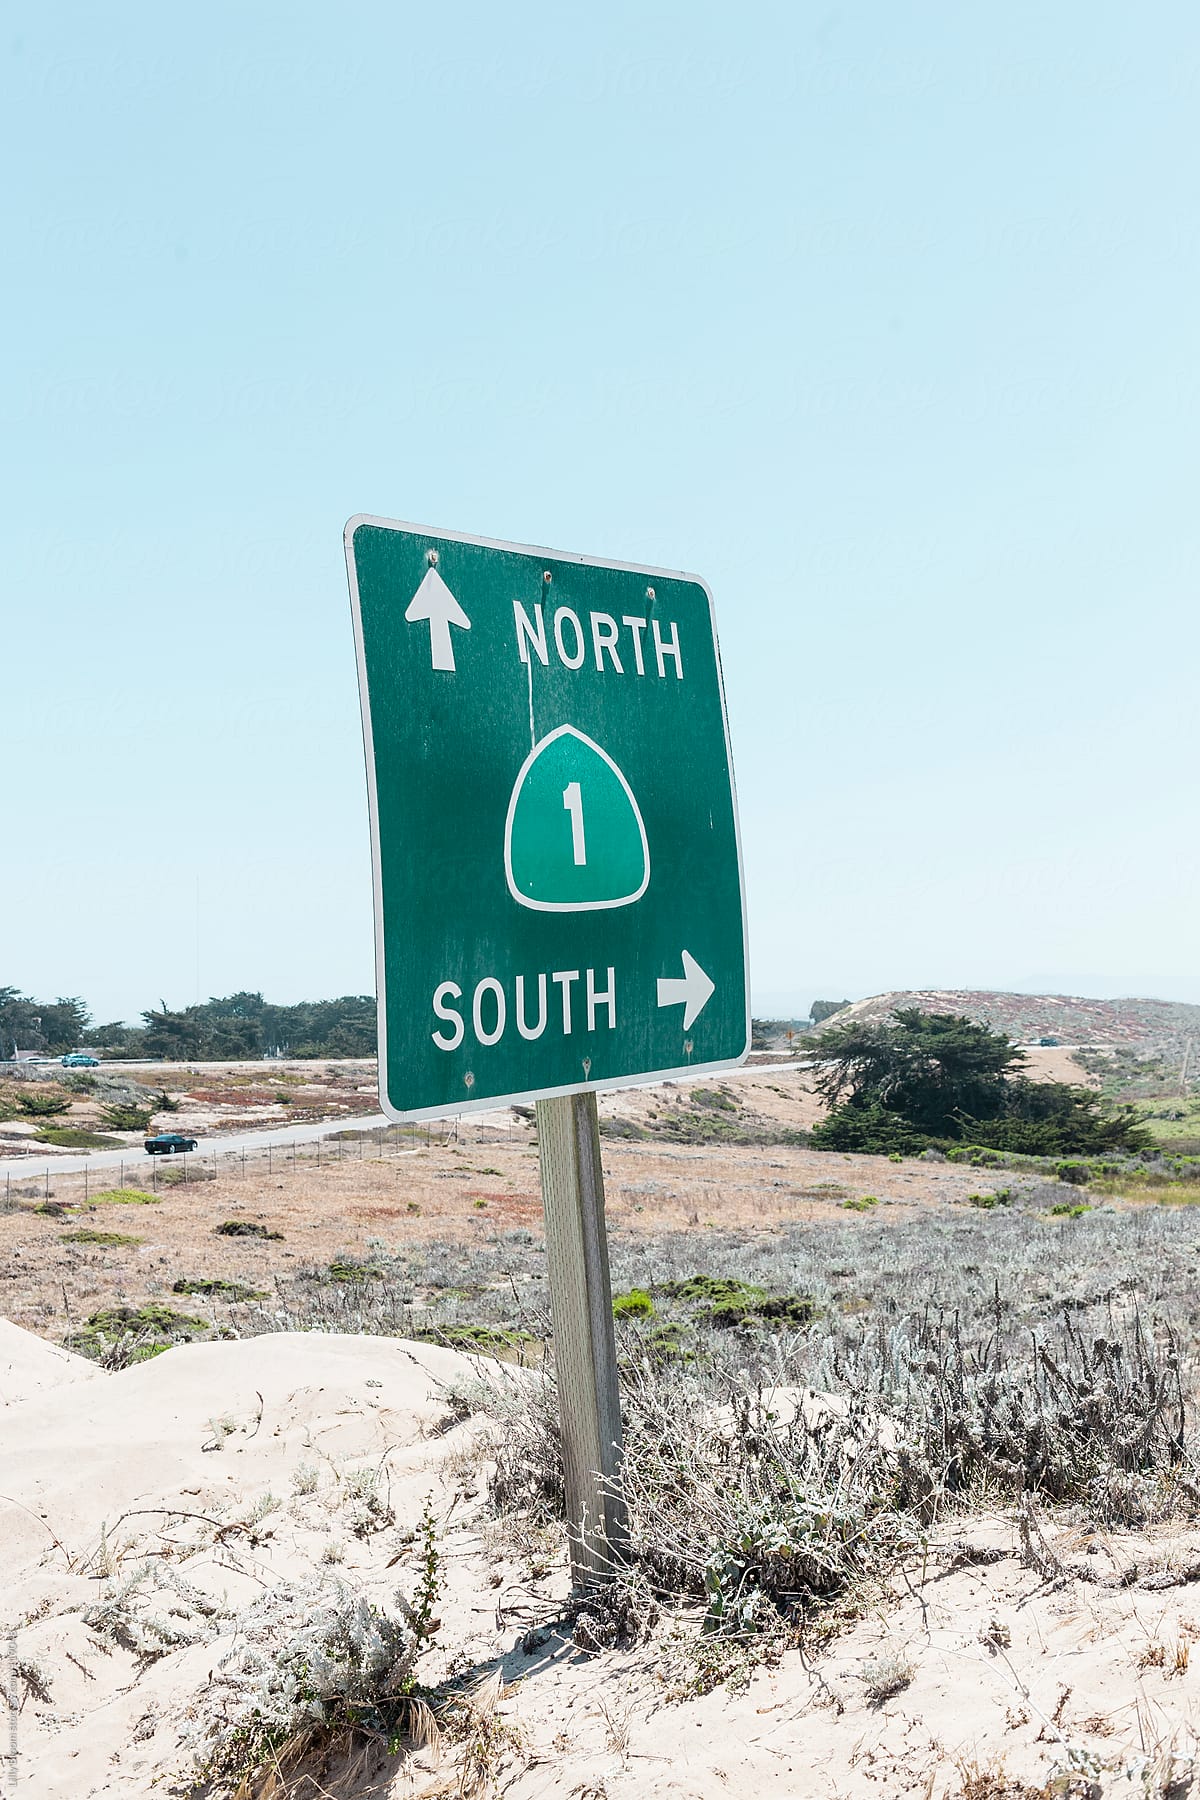 Road sign of Highway 1, pointing north and south